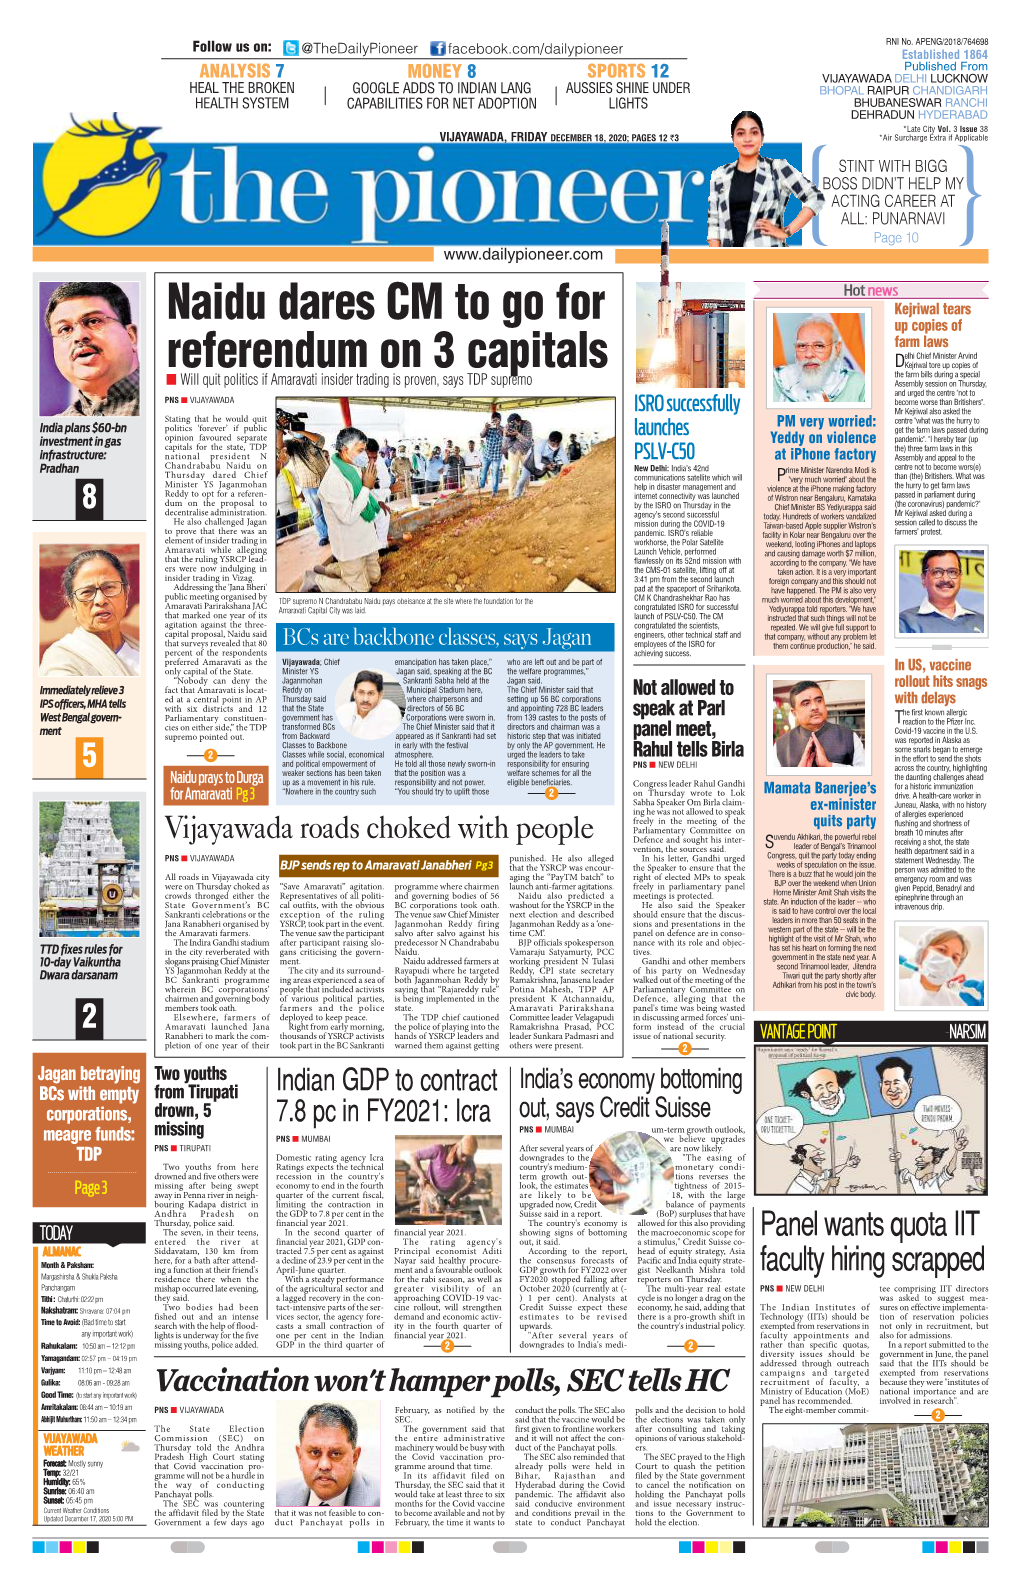 Naidu Dares CM to Go for Referendum on 3 Capitals